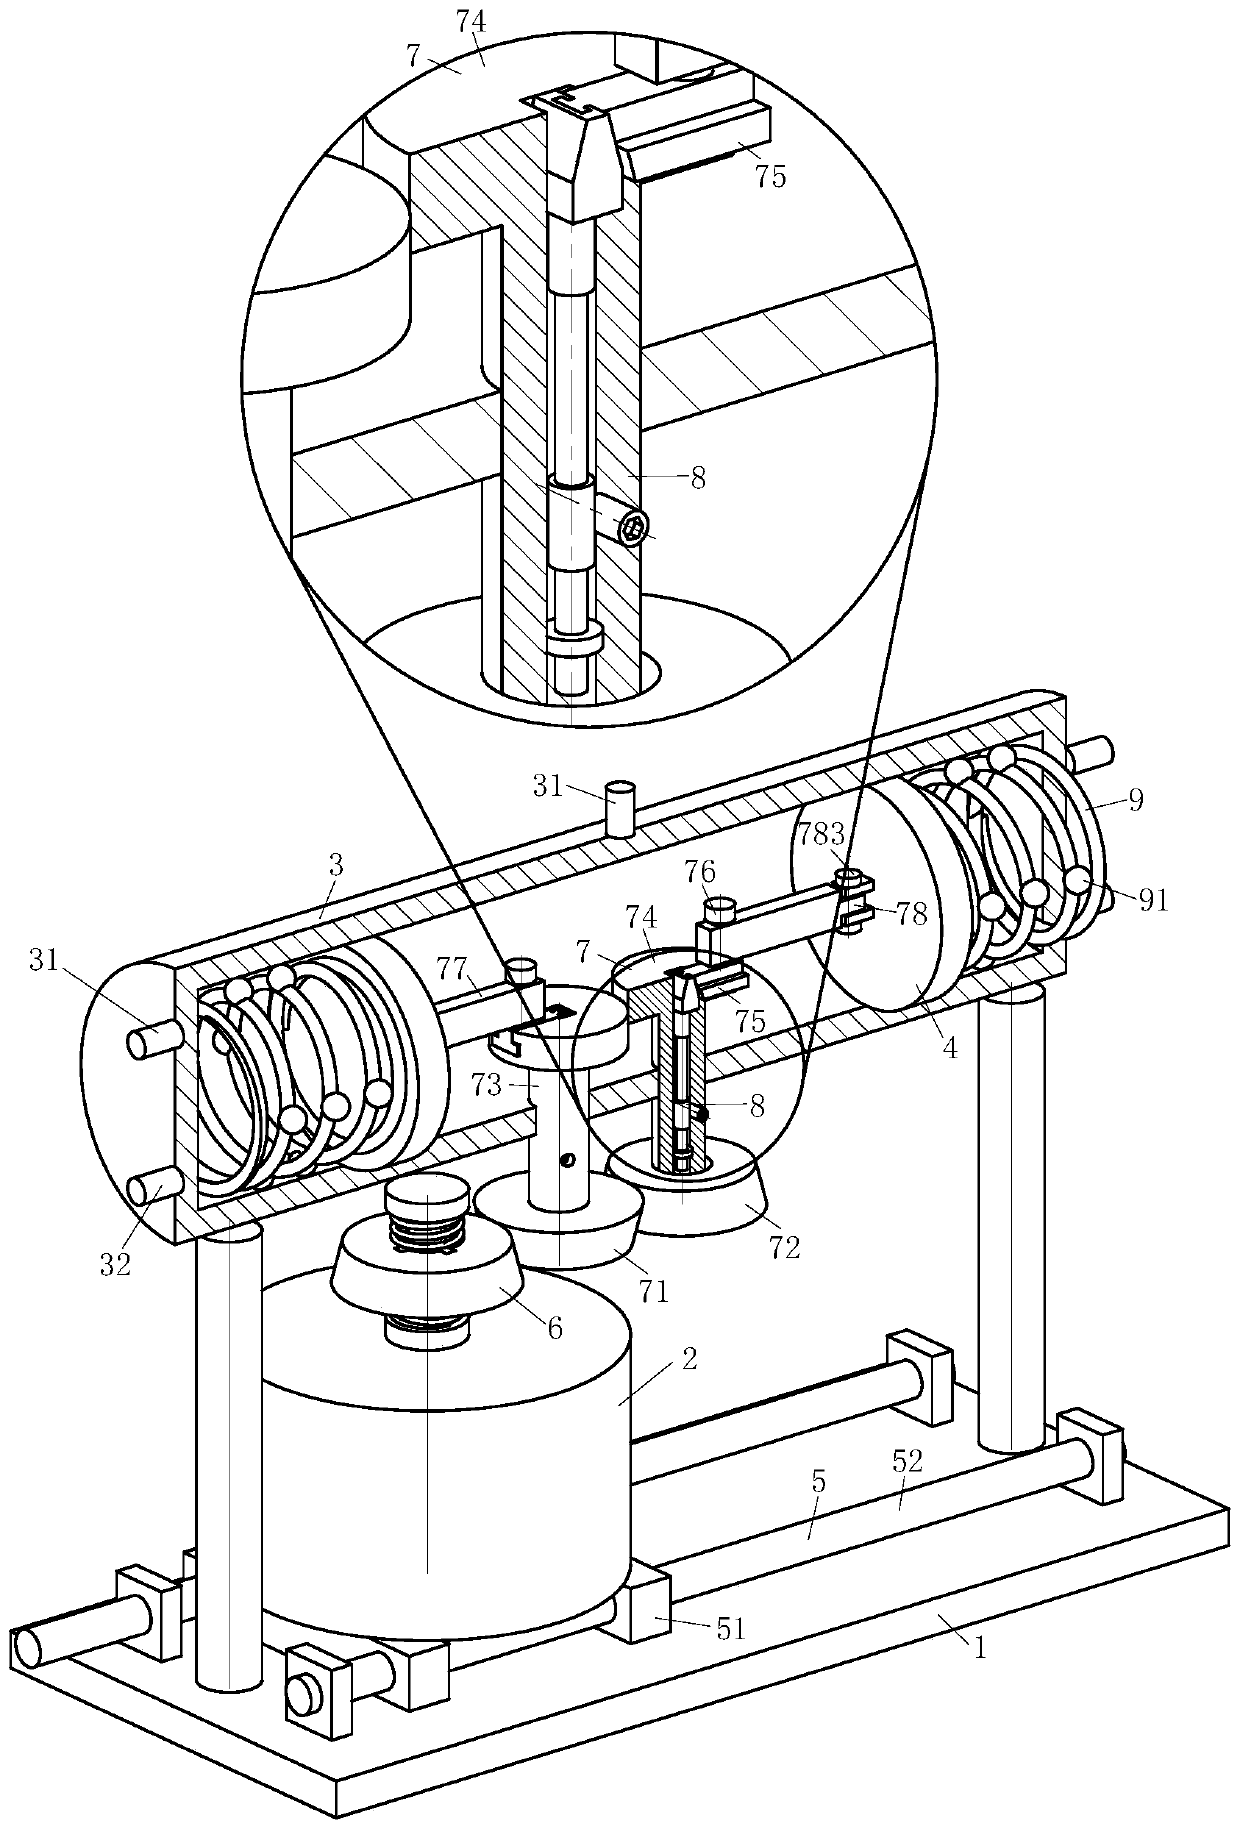 A method for changing the capacity of an air-conditioning compressor